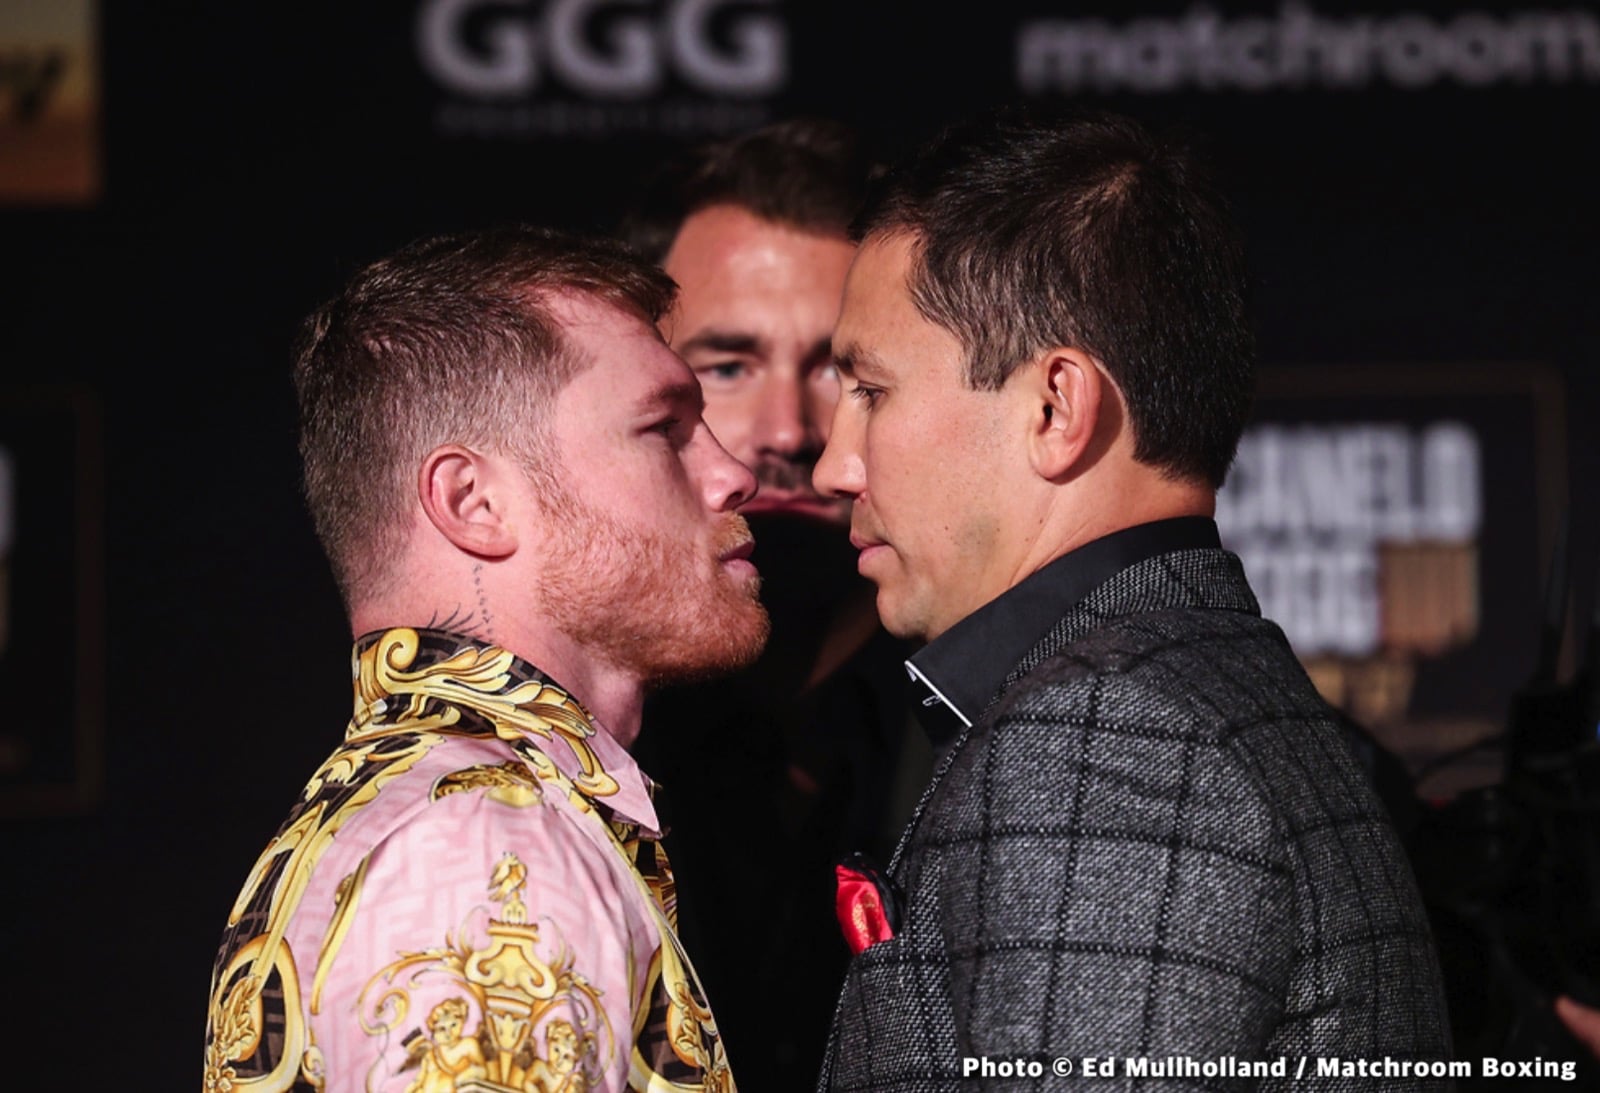 Gennady Golovkin Aiming For “Biggest Win In My Career” In Third Tango With Canelo